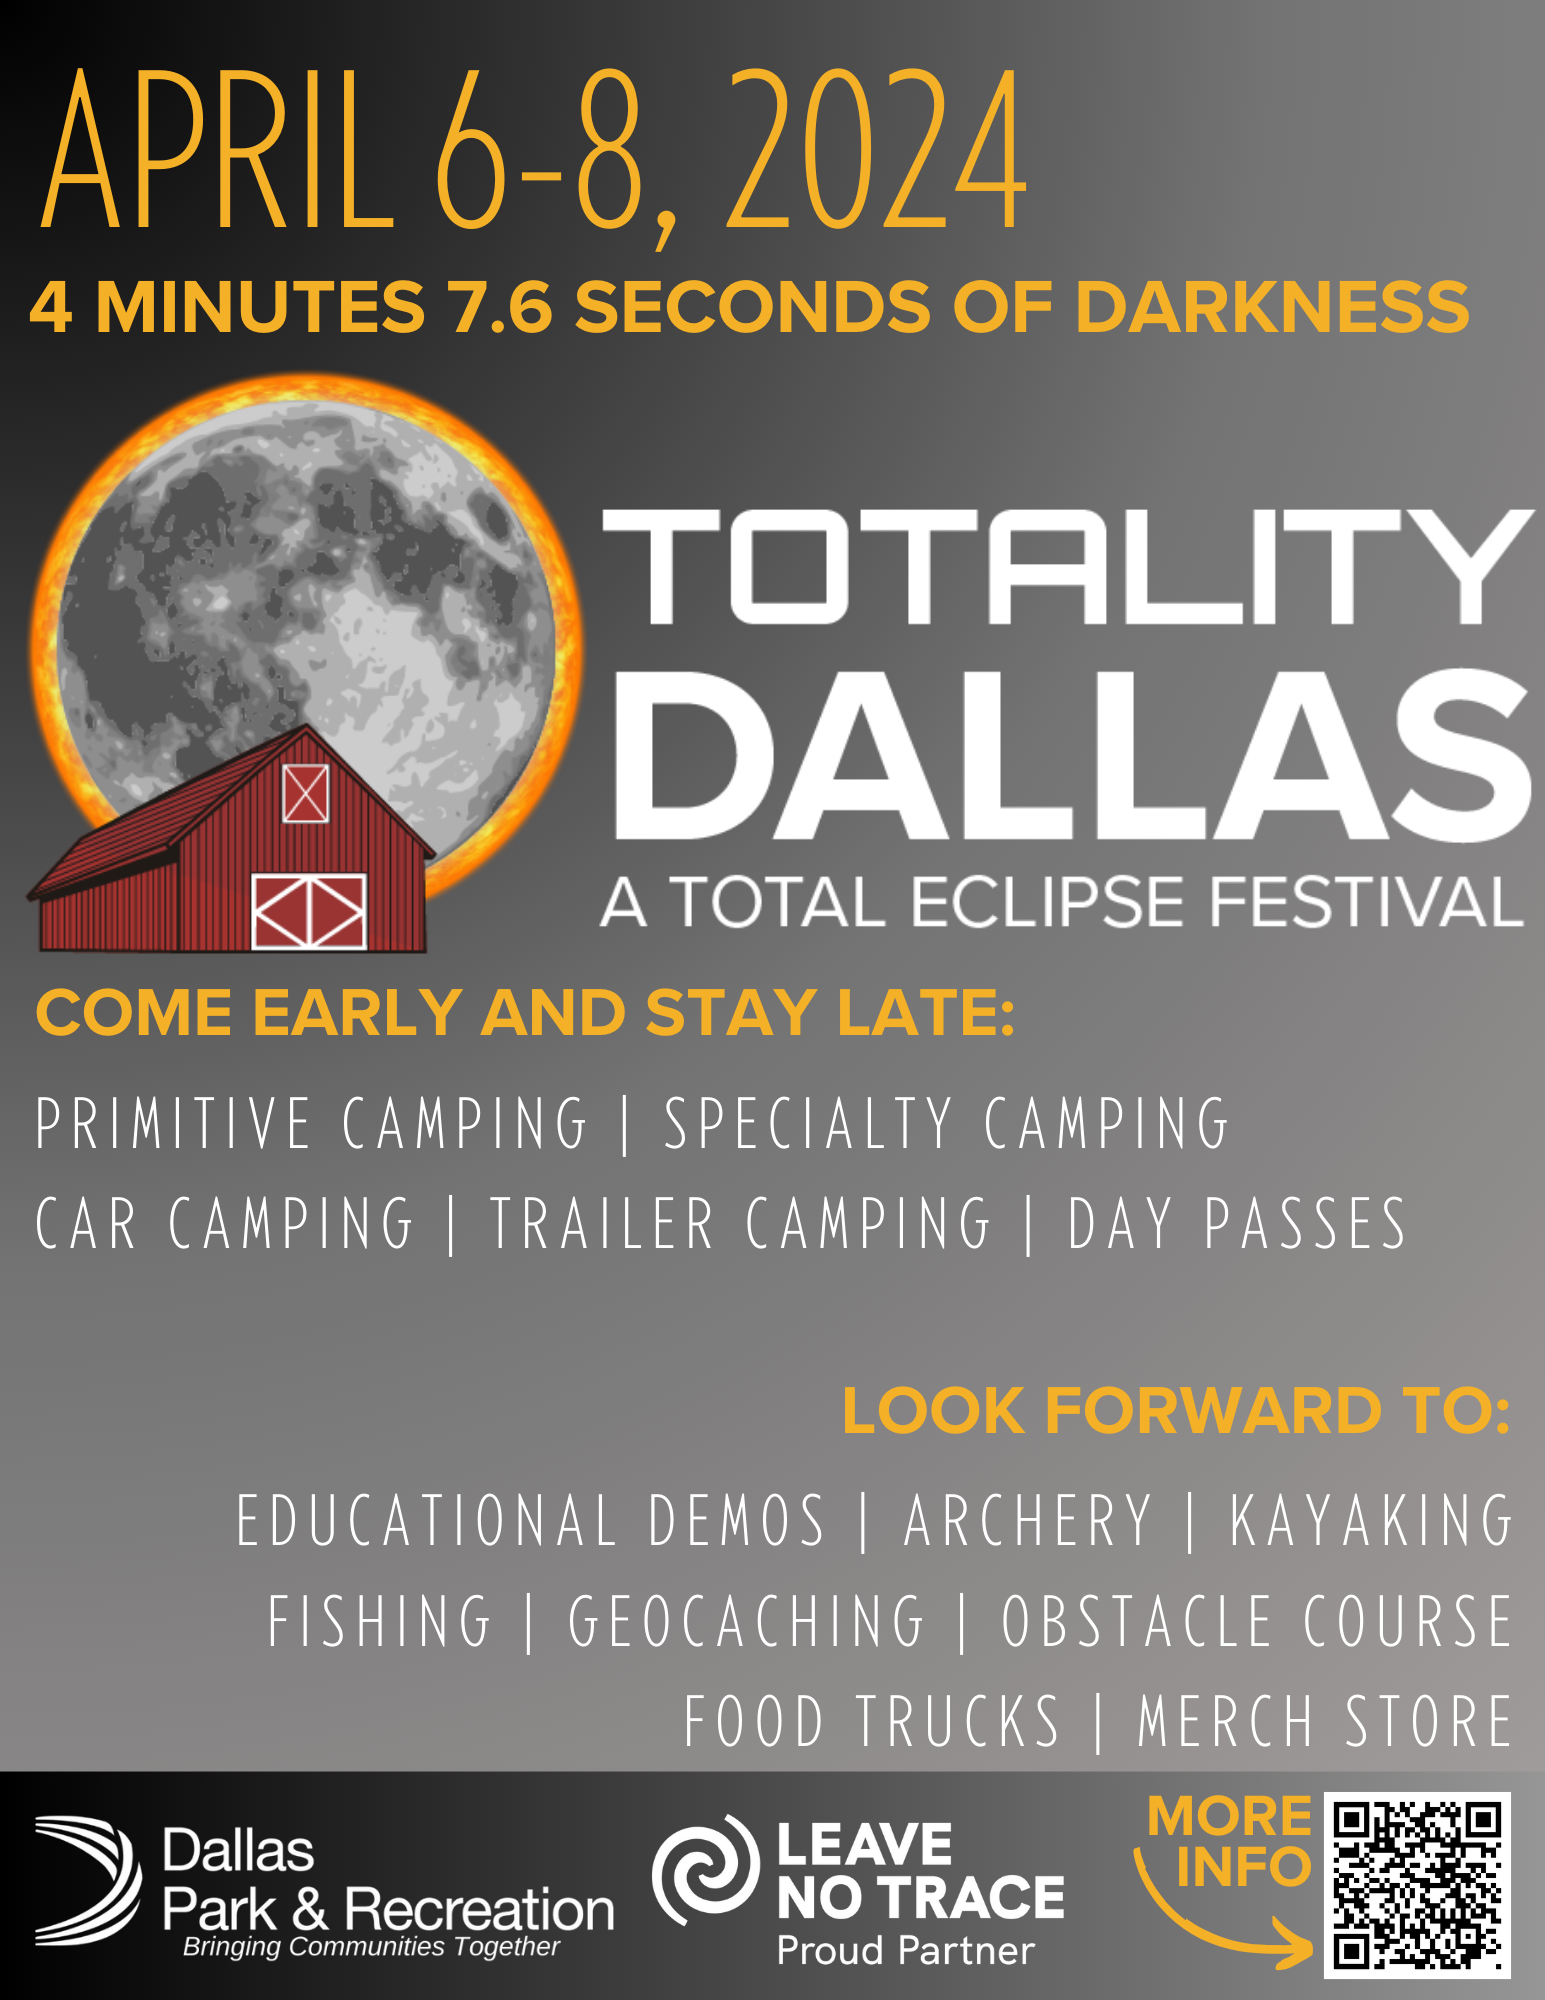 Totality Dallas flyer